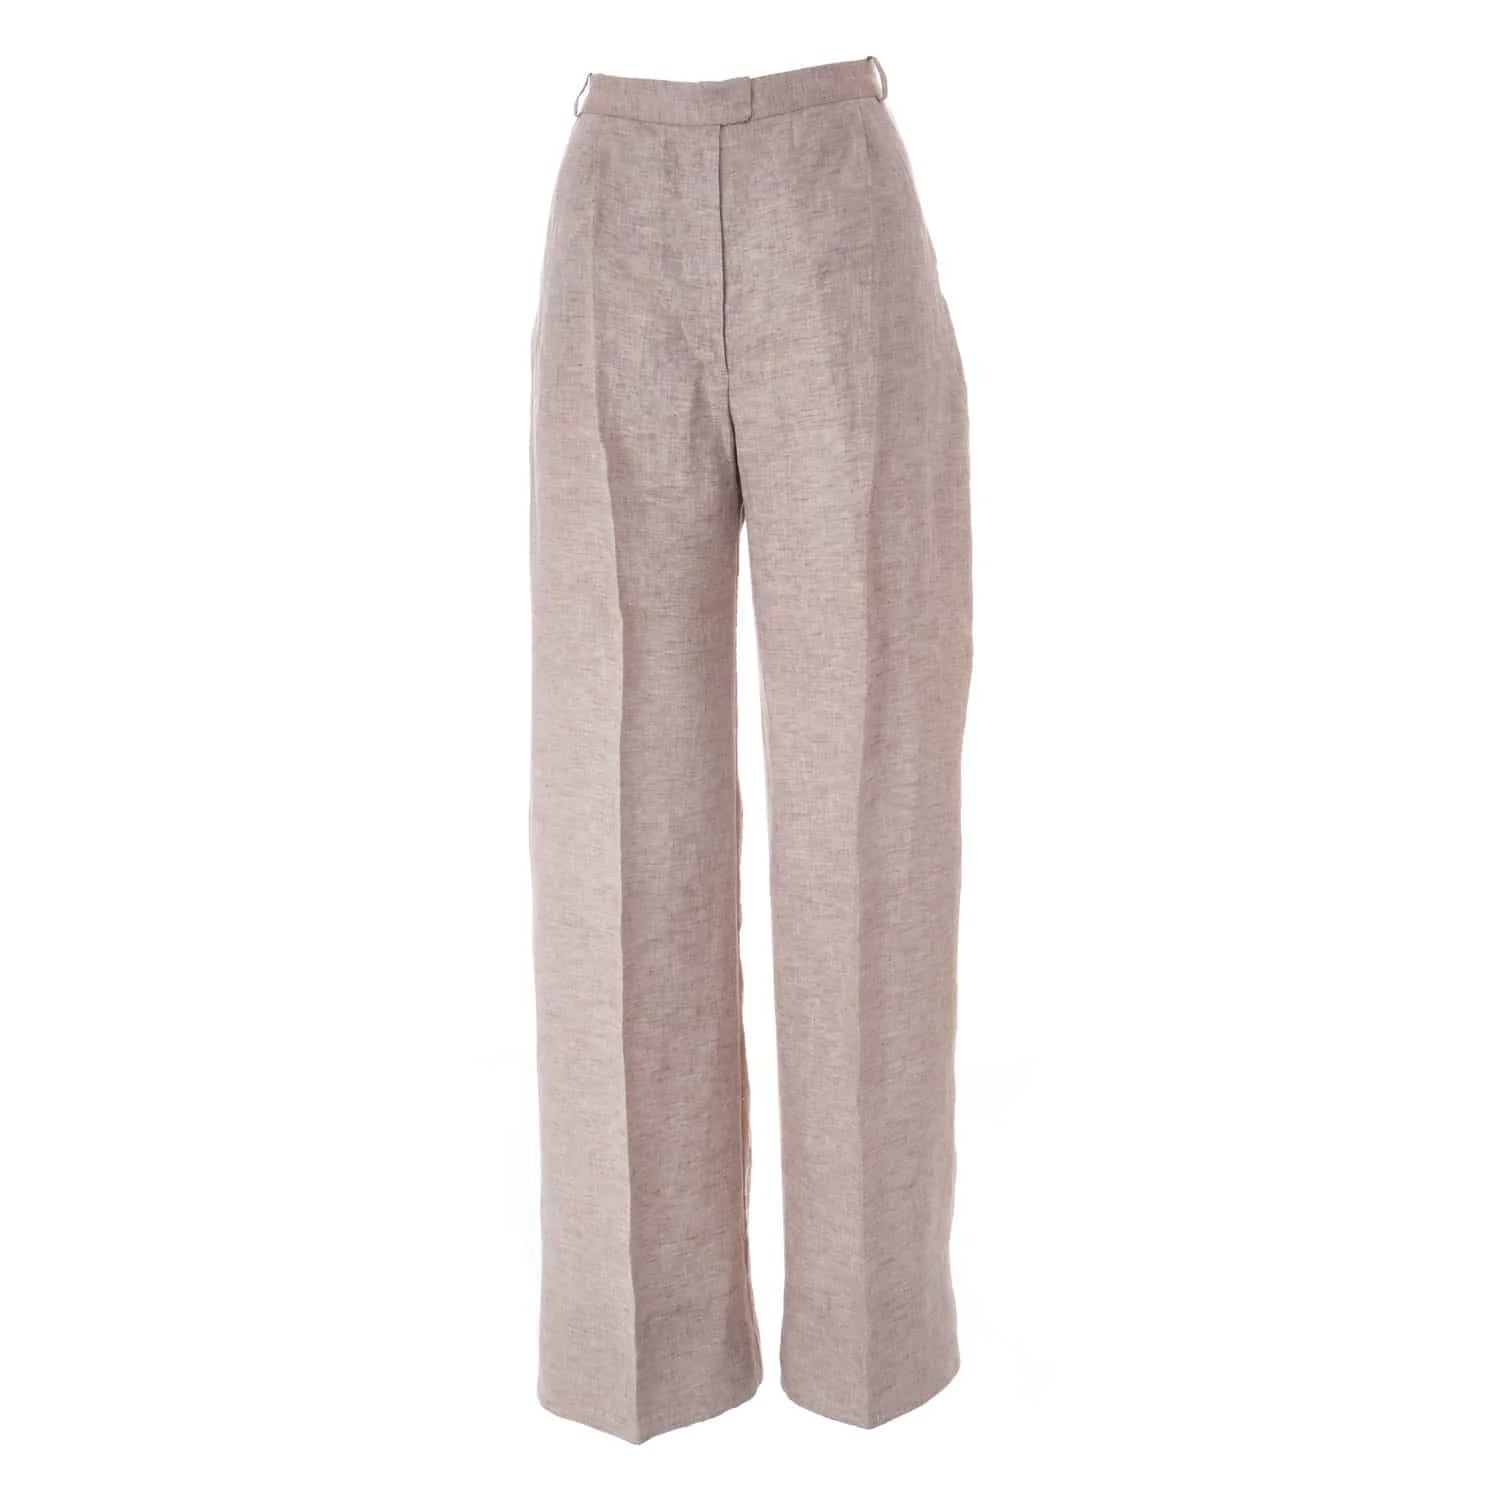 Linen trousers - Trousers